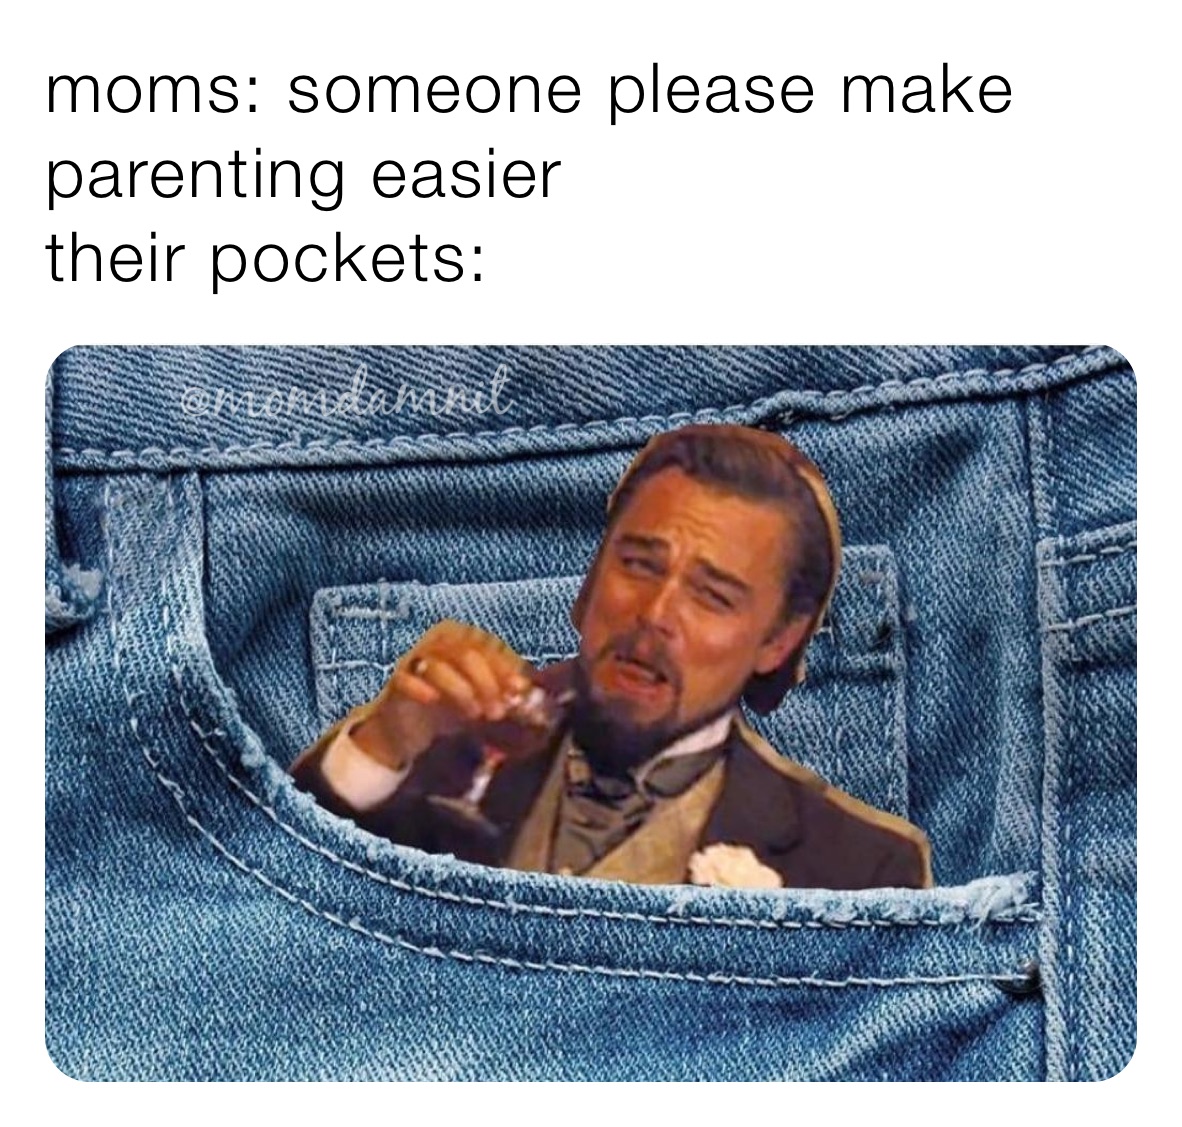 moms: someone please make parenting easier
their pockets: